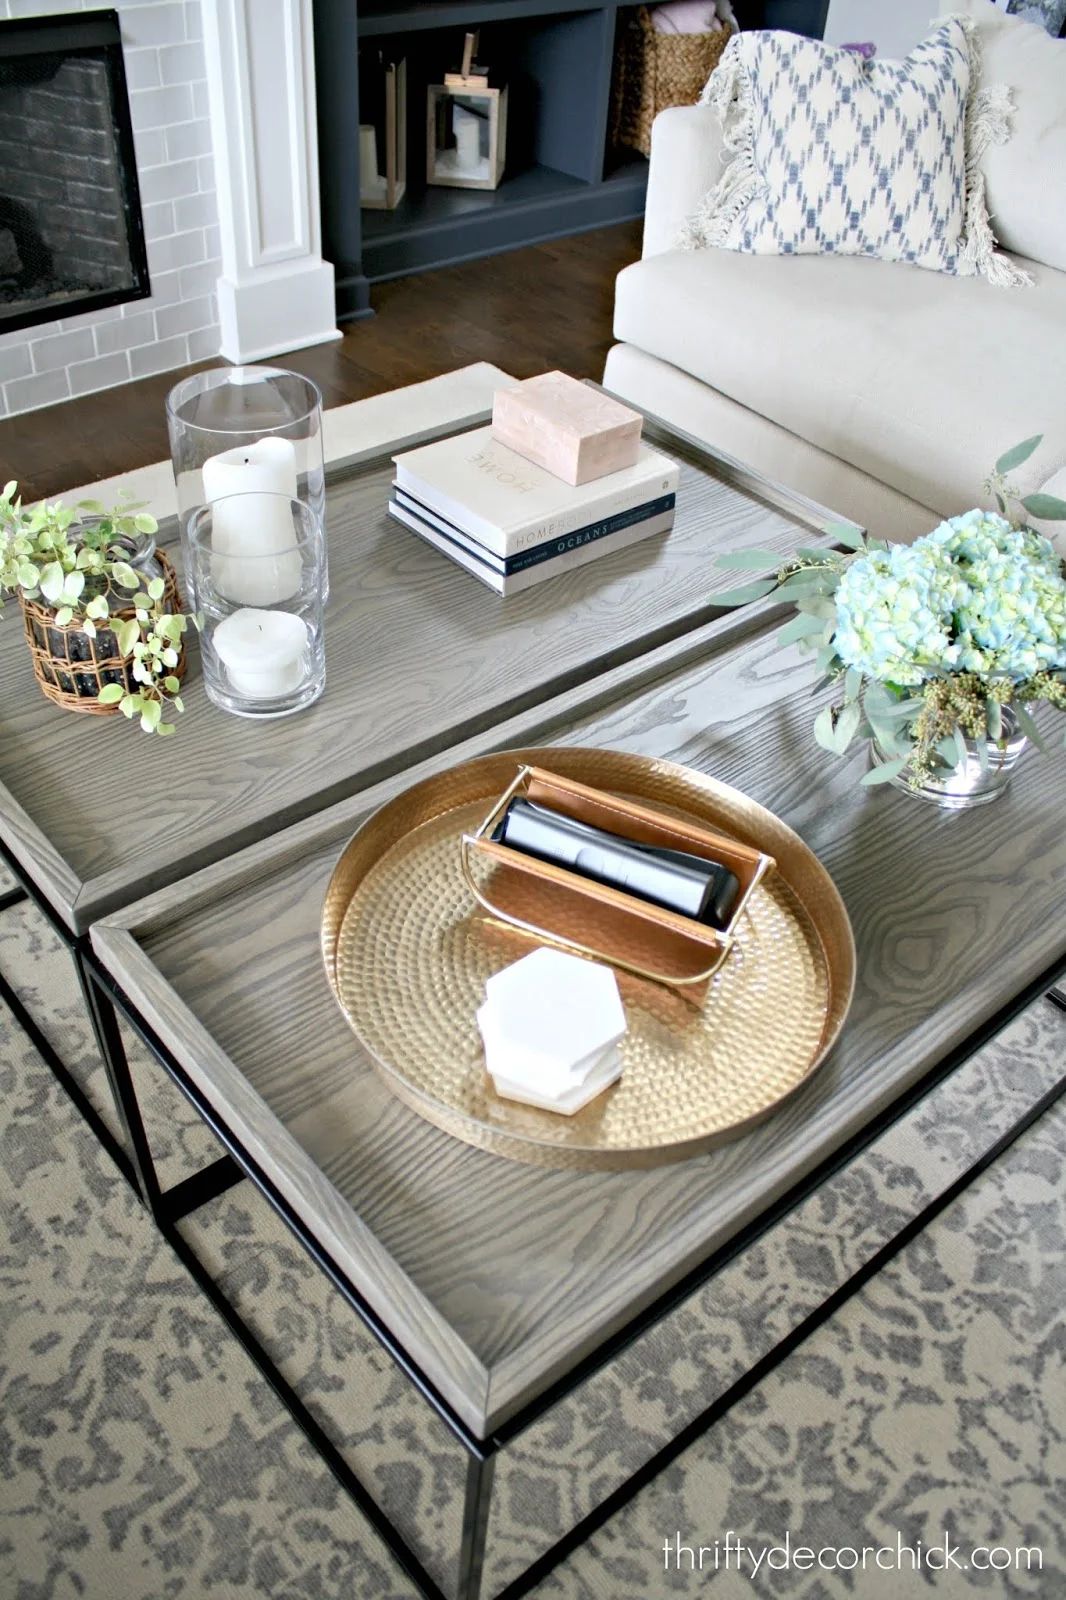 Diy Square {Big!} Wood Coffee Table For Less | Thrifty Decor Chick |  Thrifty Diy, Decor And Organizing Pertaining To Rectangular Coffee Tables With Pedestal Bases (View 12 of 15)